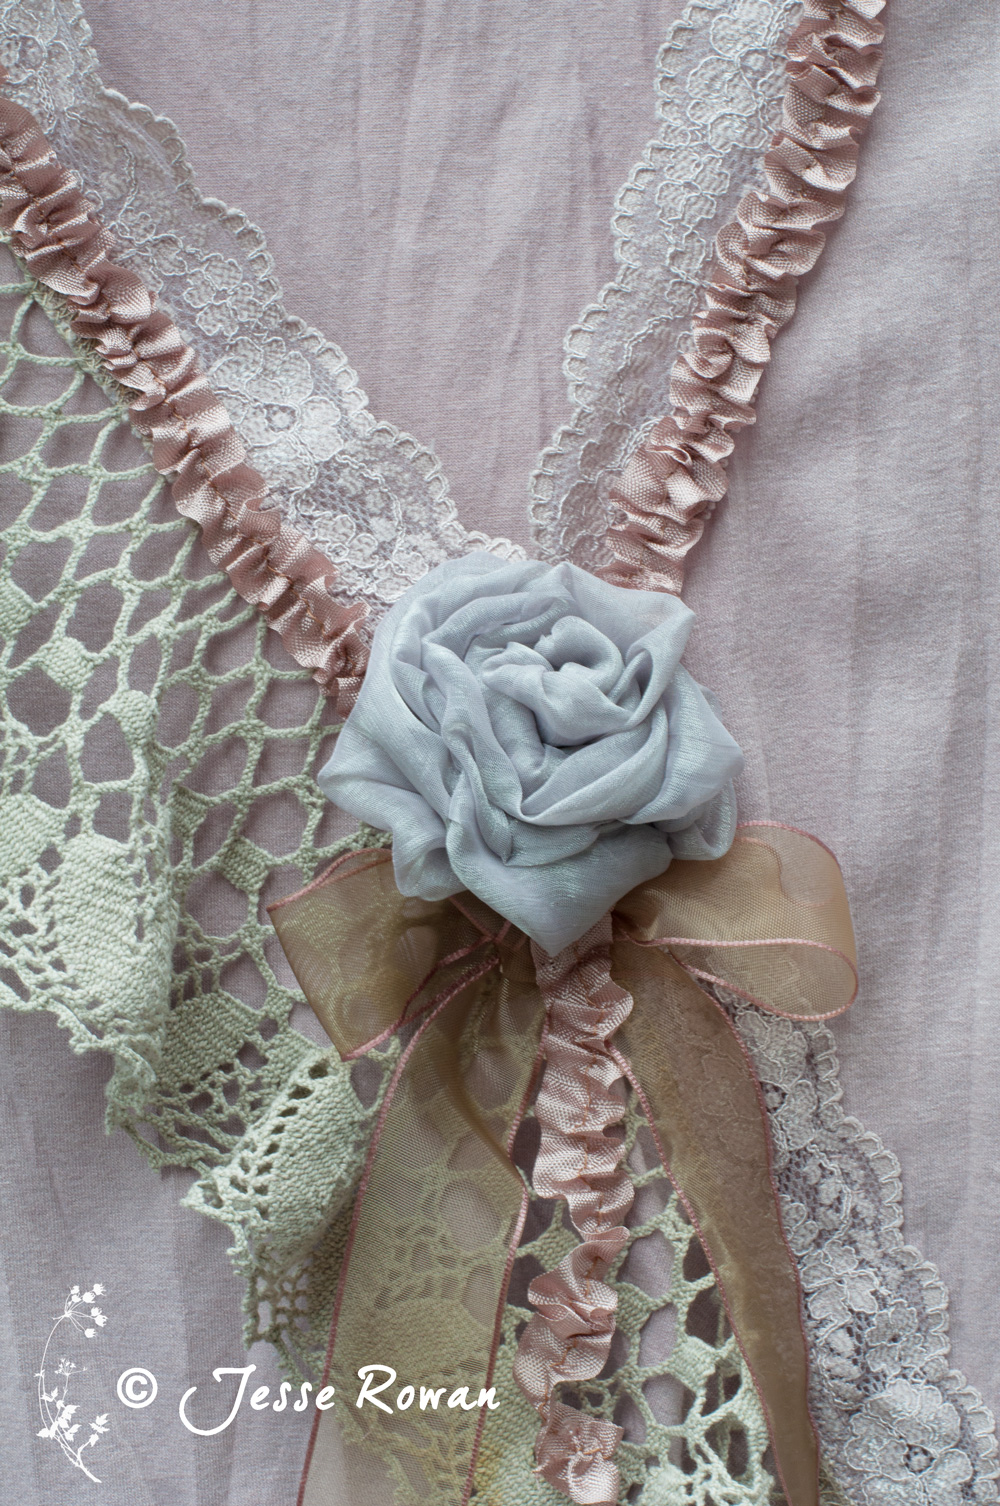 Lace Age Girl: Pastel Roses and Lace